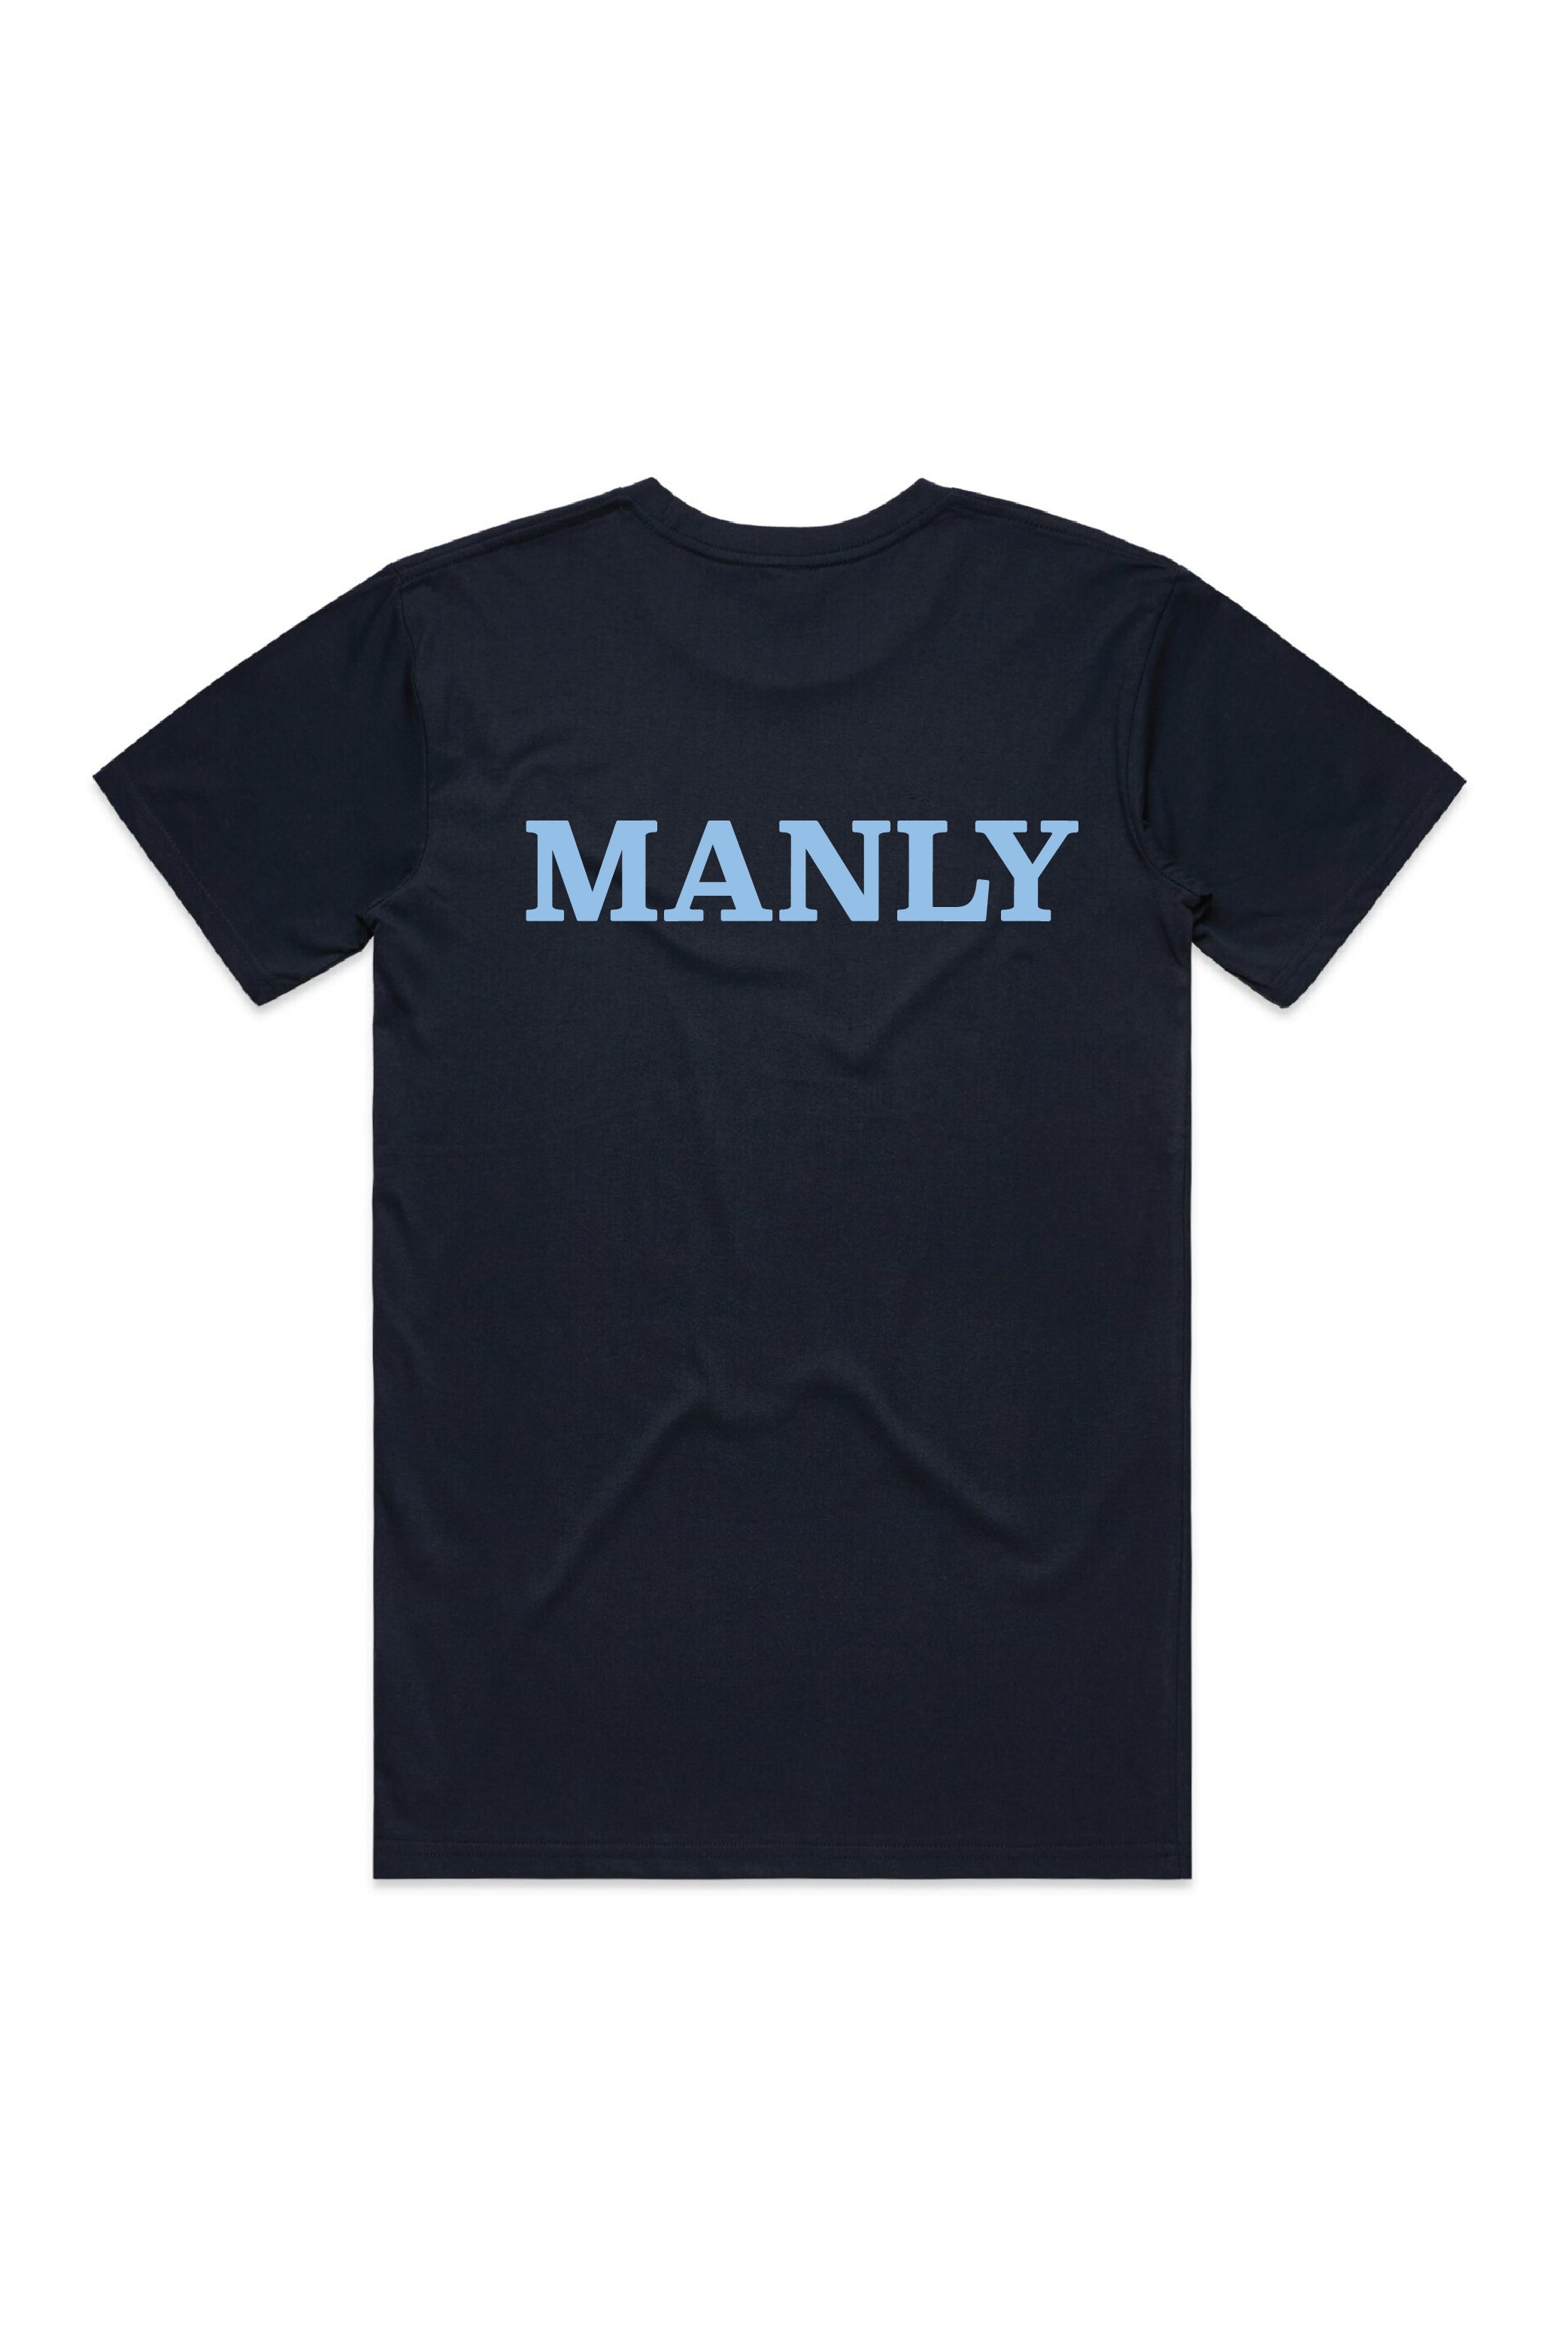 Manly Swimming Club Men's Cotton Tee